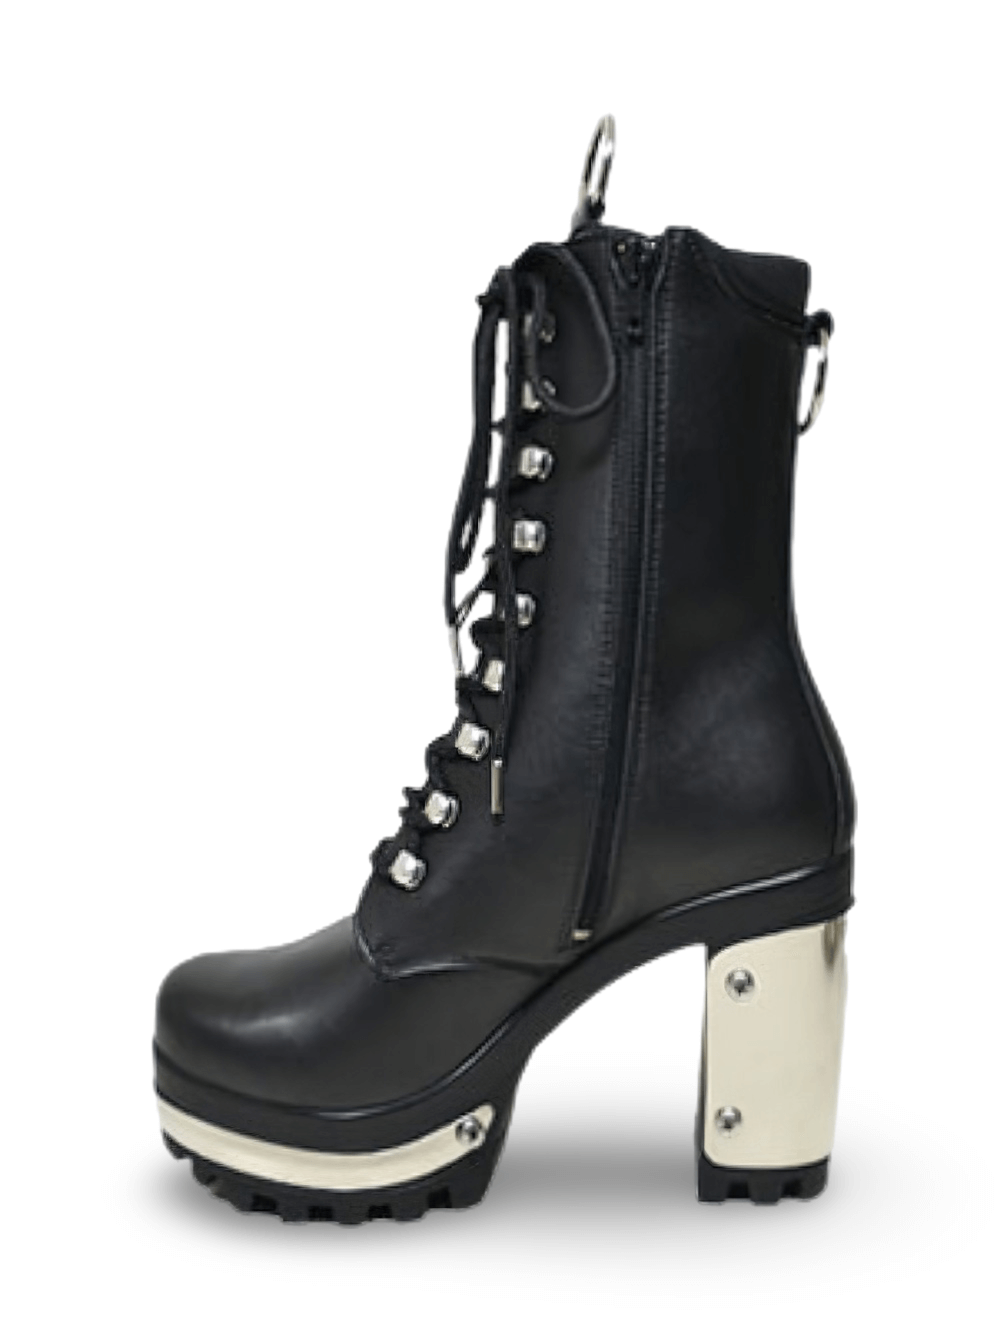 Stylish Black Laced Boots with Metal Heel Plate